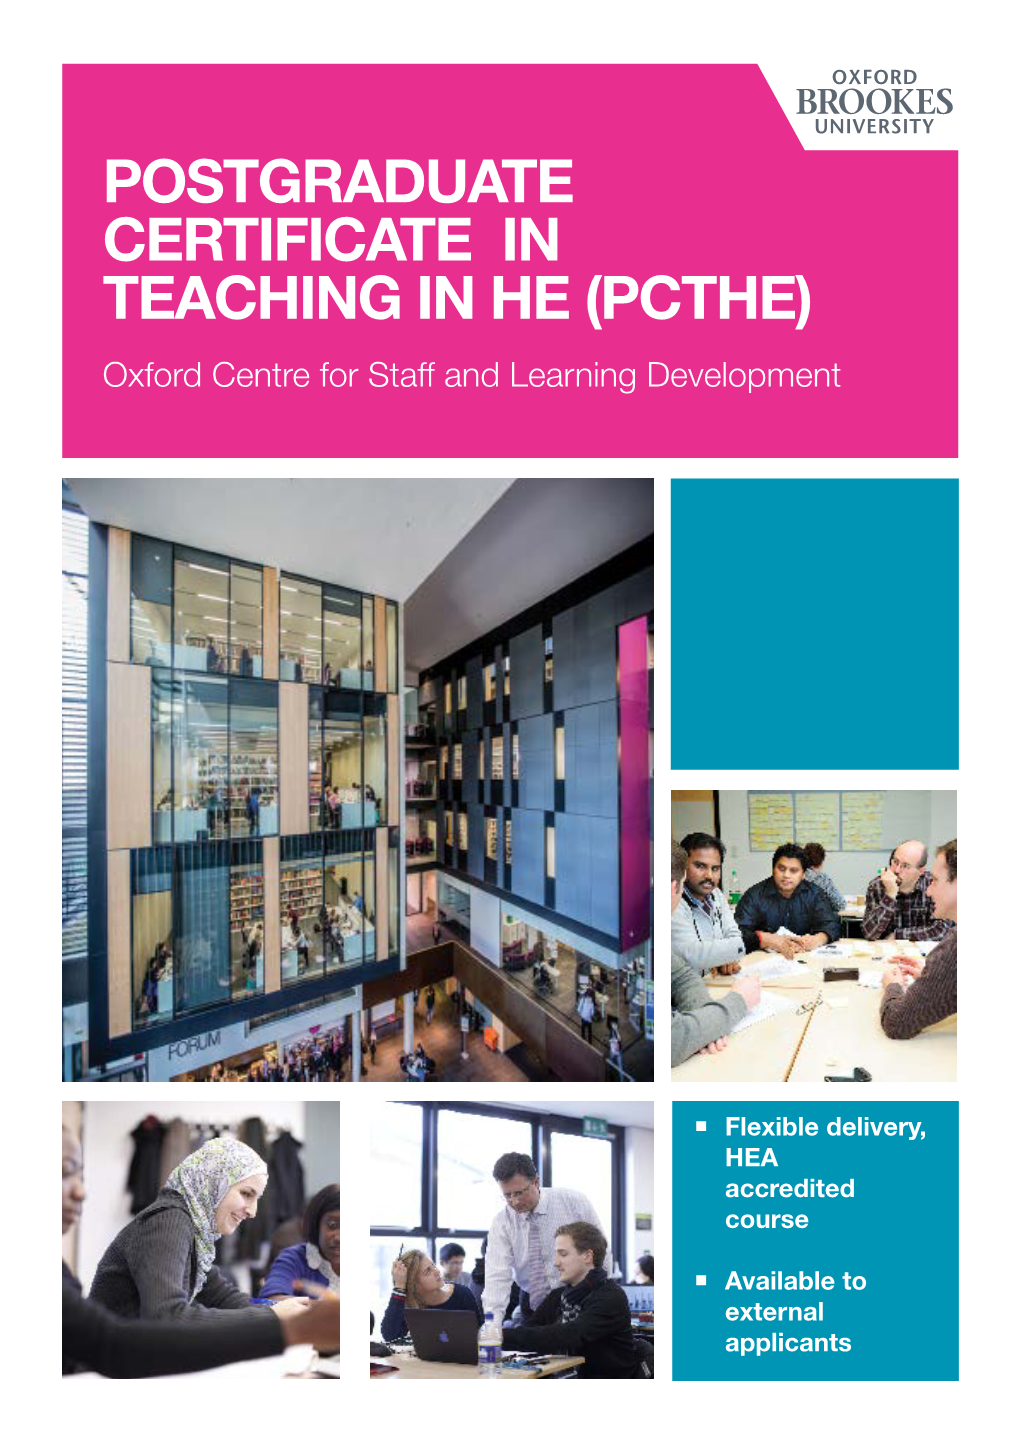 POSTGRADUATE CERTIFICATE in TEACHING in HE (PCTHE) Oxford Centre for Staff and Learning Development